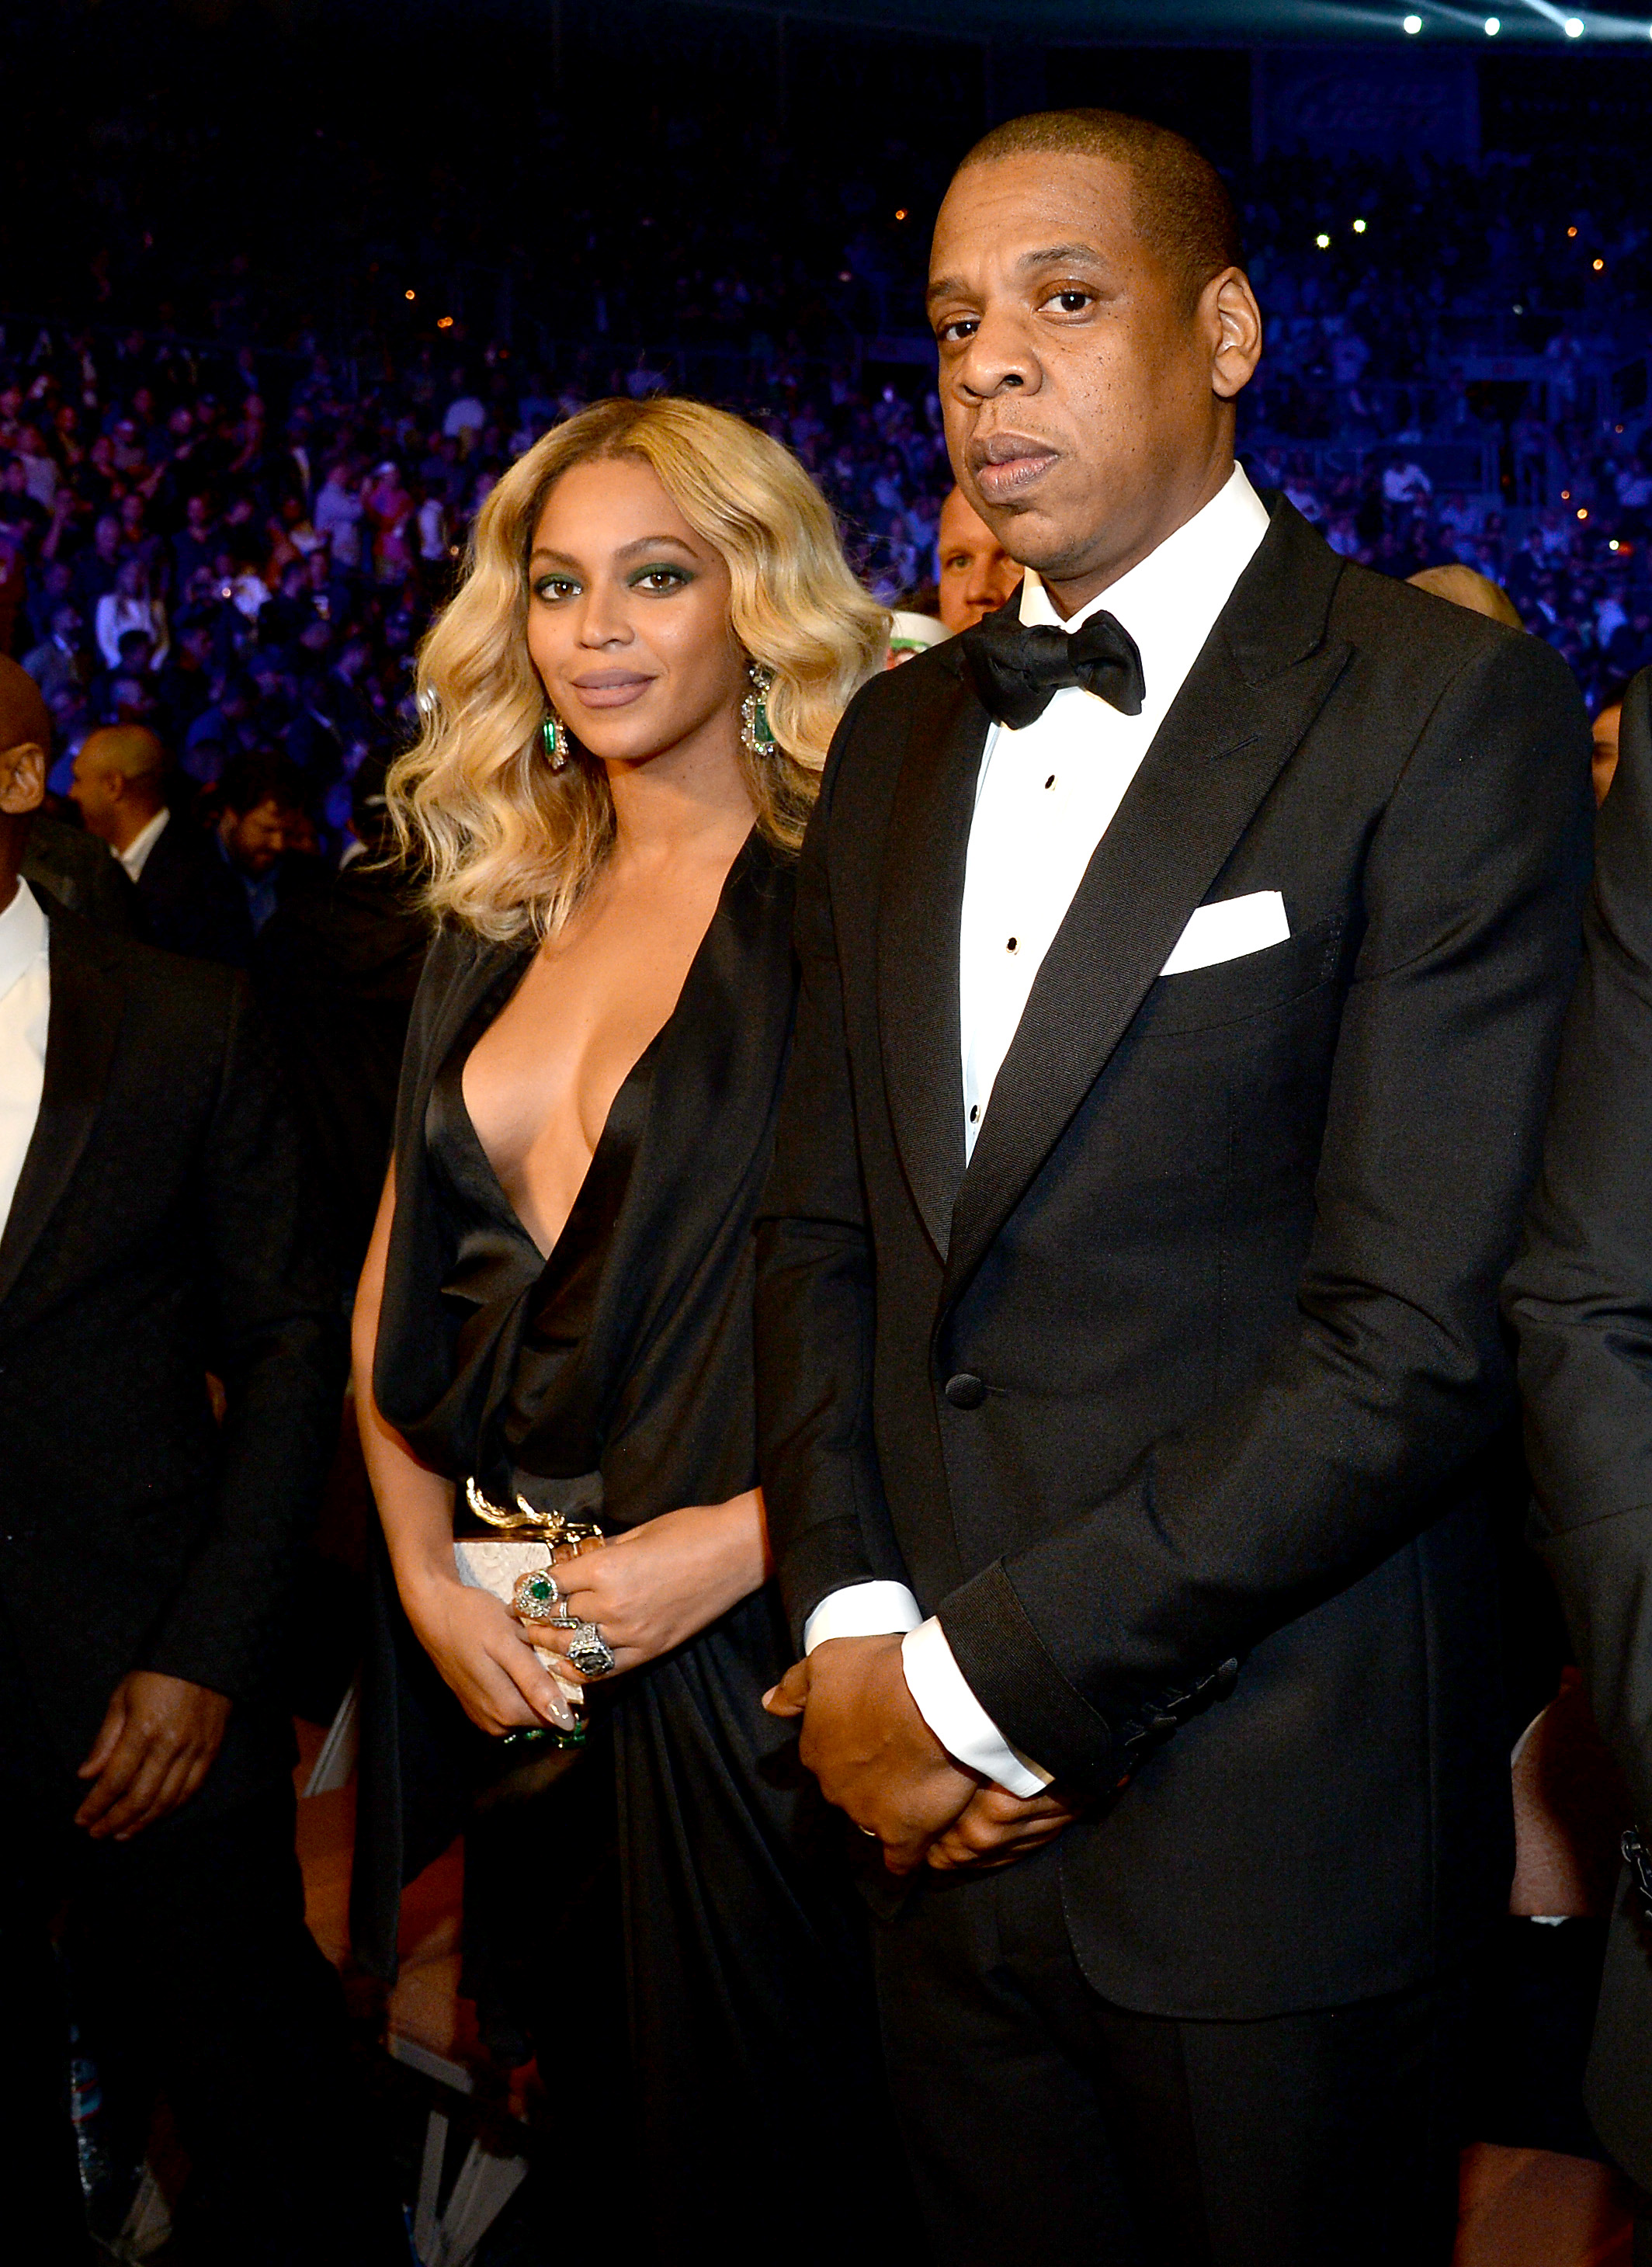 Beyonce Knowles and Jay-Z attend Miguel Cotto vs. Canelo Alvarez at the Mandalay Bay Events Center on November 21, 2015 in Las Vegas, Nevada. (Photo by Kevin Mazur/Getty Images for Roc Nation Sports) (Kevin Mazur—Getty Images for Roc Nation Spor)